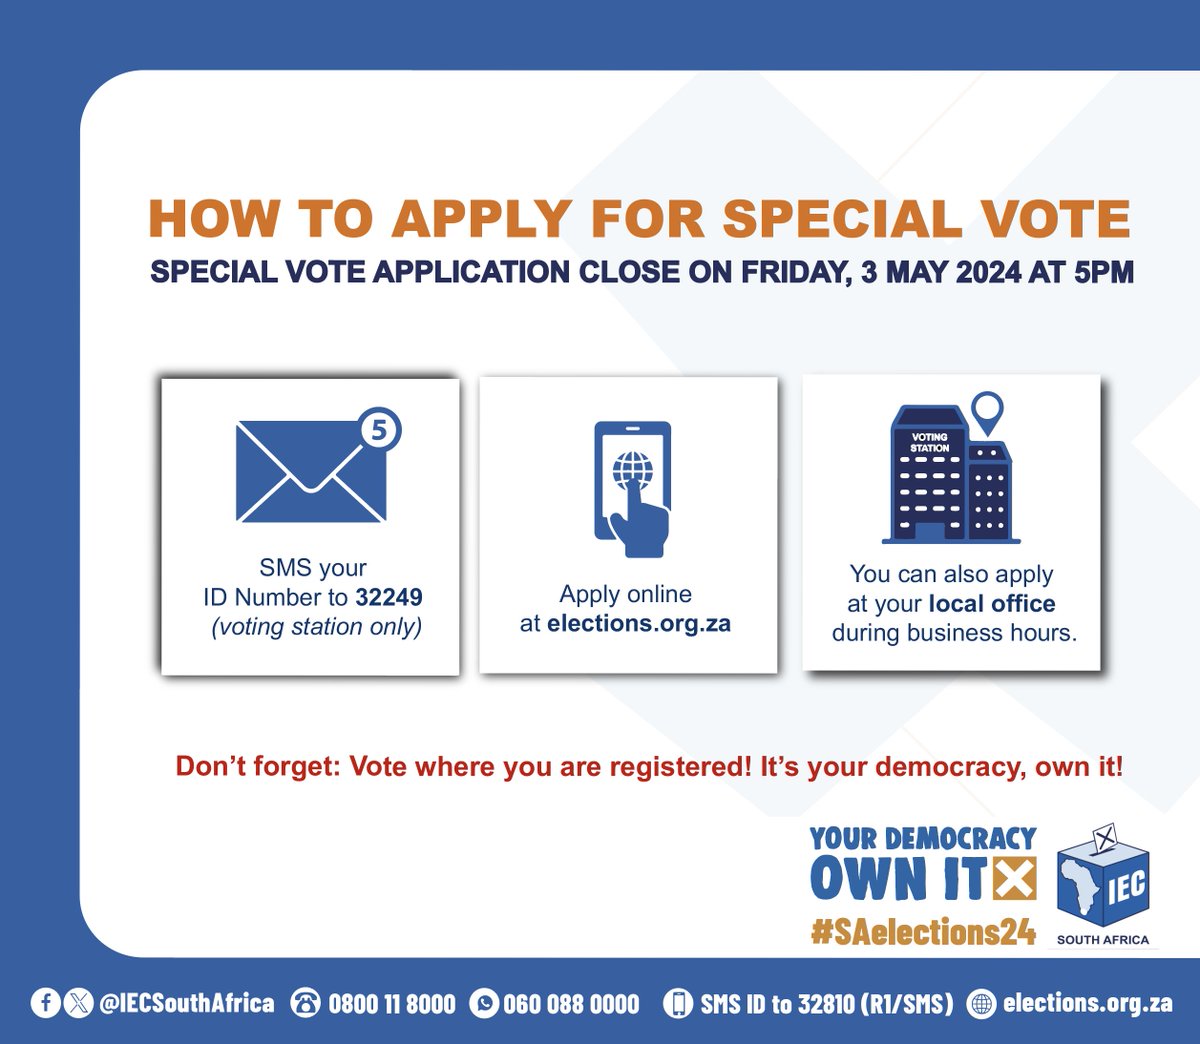 ⏰Time is running out! Apply for your special vote by Friday, 3 May 2024. Home visits are for those who can't travel, and special voting at stations is for those who can't be there on Election Day. Remember, there's NO age-based access—everyone must apply! #SAelection24